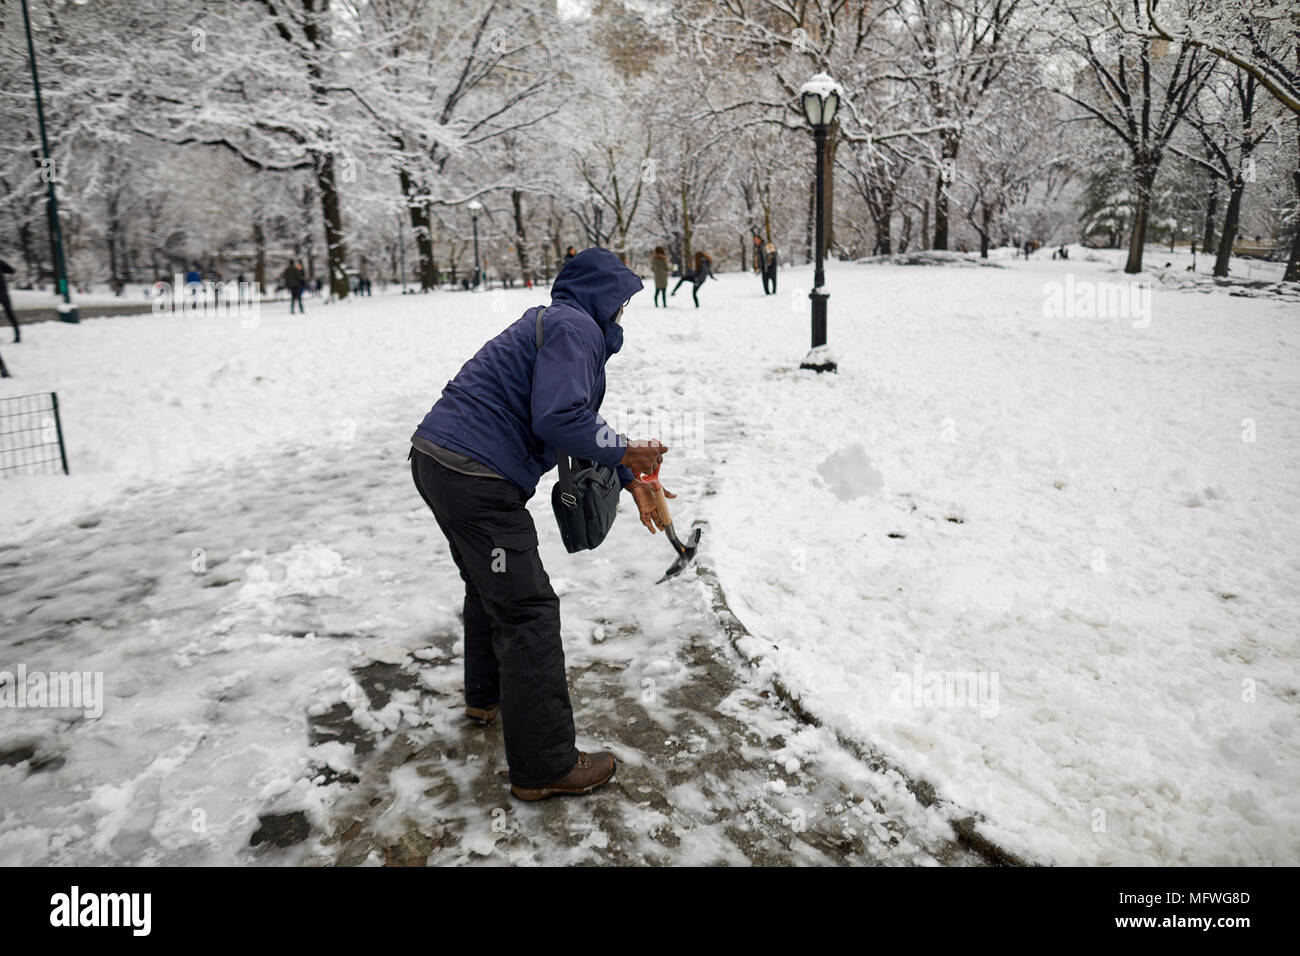 Manhattan in New York City  Easter snow covers Grand Central Park, worker clearing paths Stock Photo